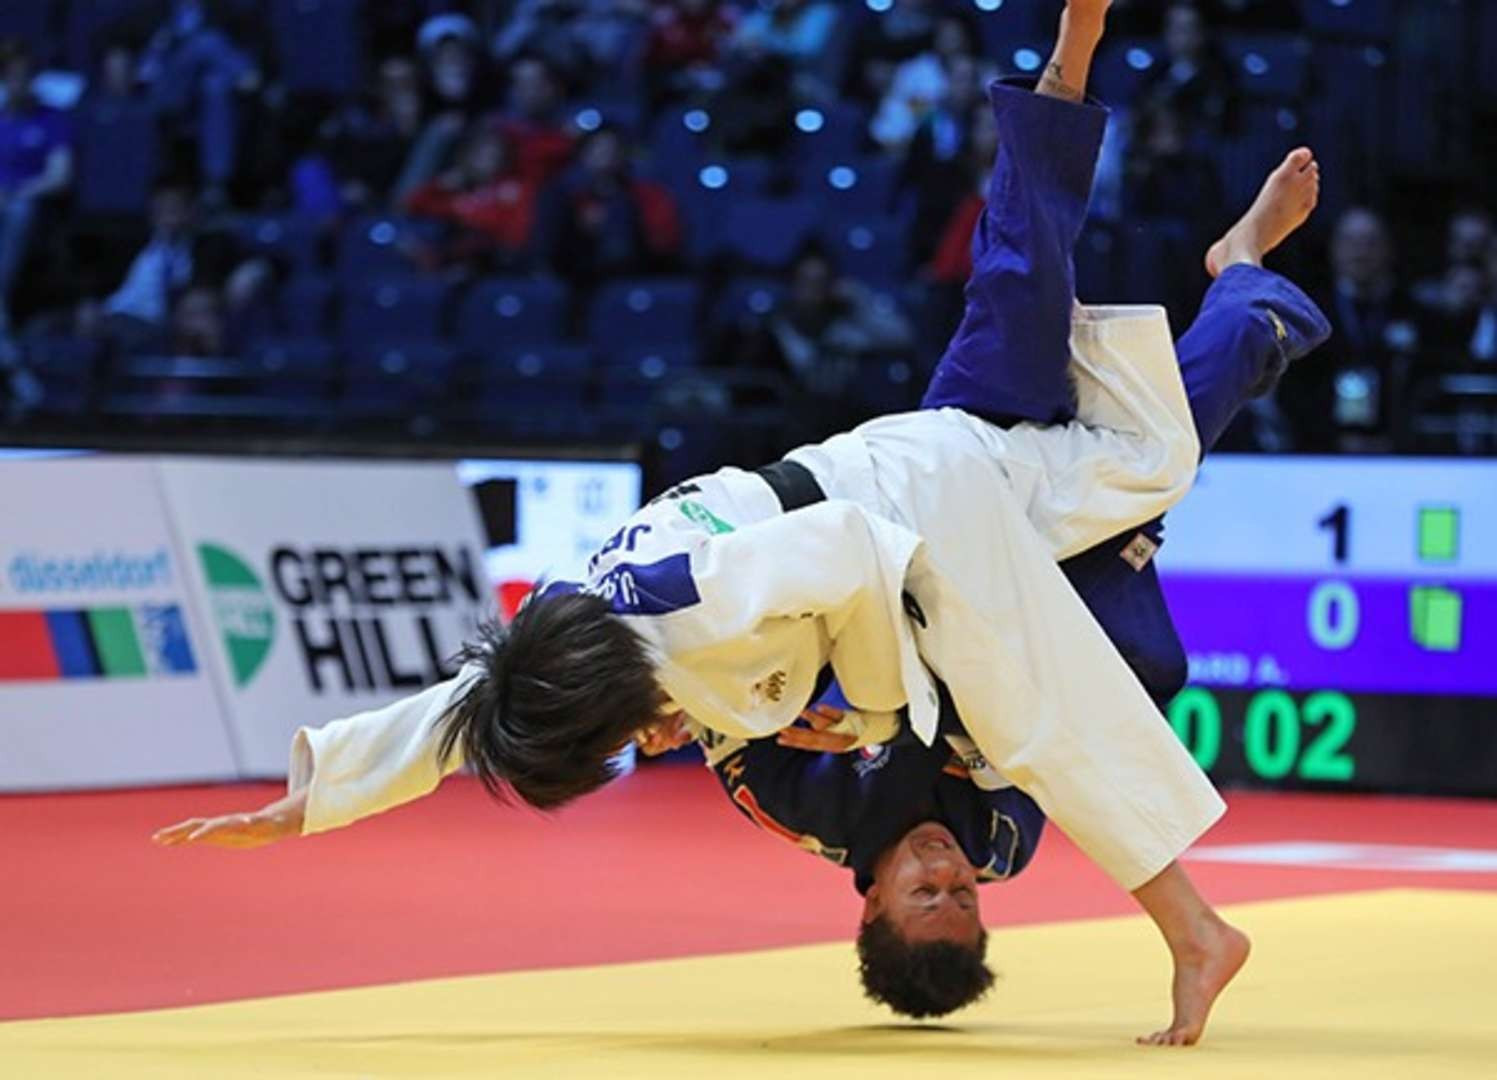 There was record prize money of $1.4 million in judo's biggest events, including the World Tour, last year ©IJF